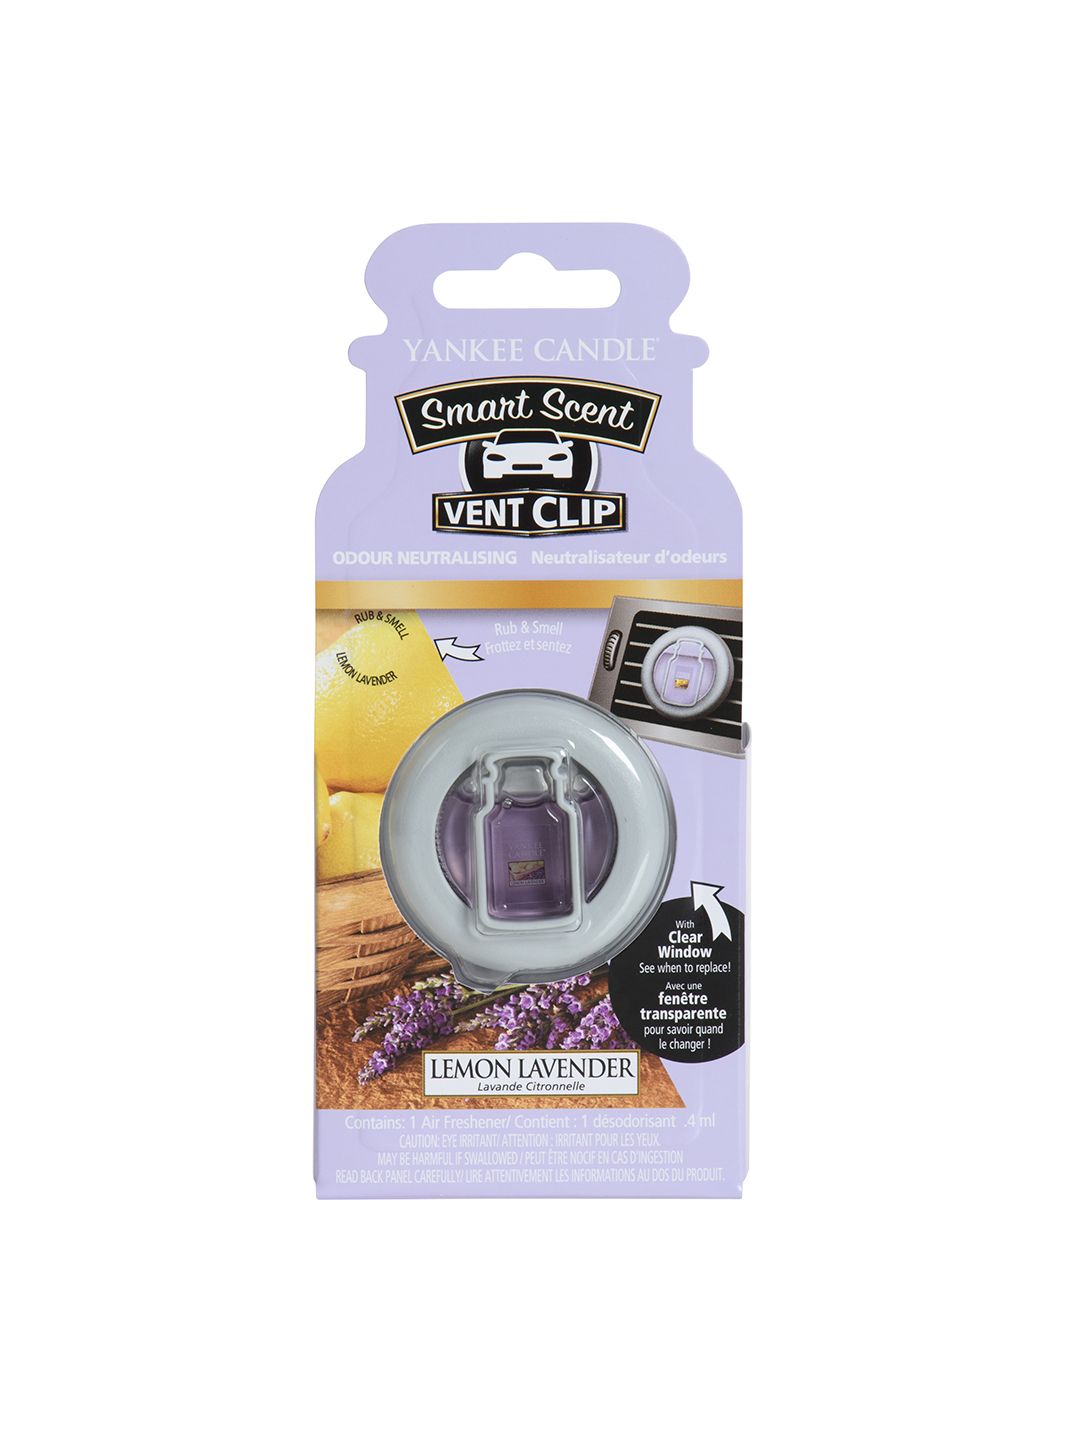 YANKEE CANDLE Lemon Lavender Smart Scent Vent Clip Air Freshener Price in India